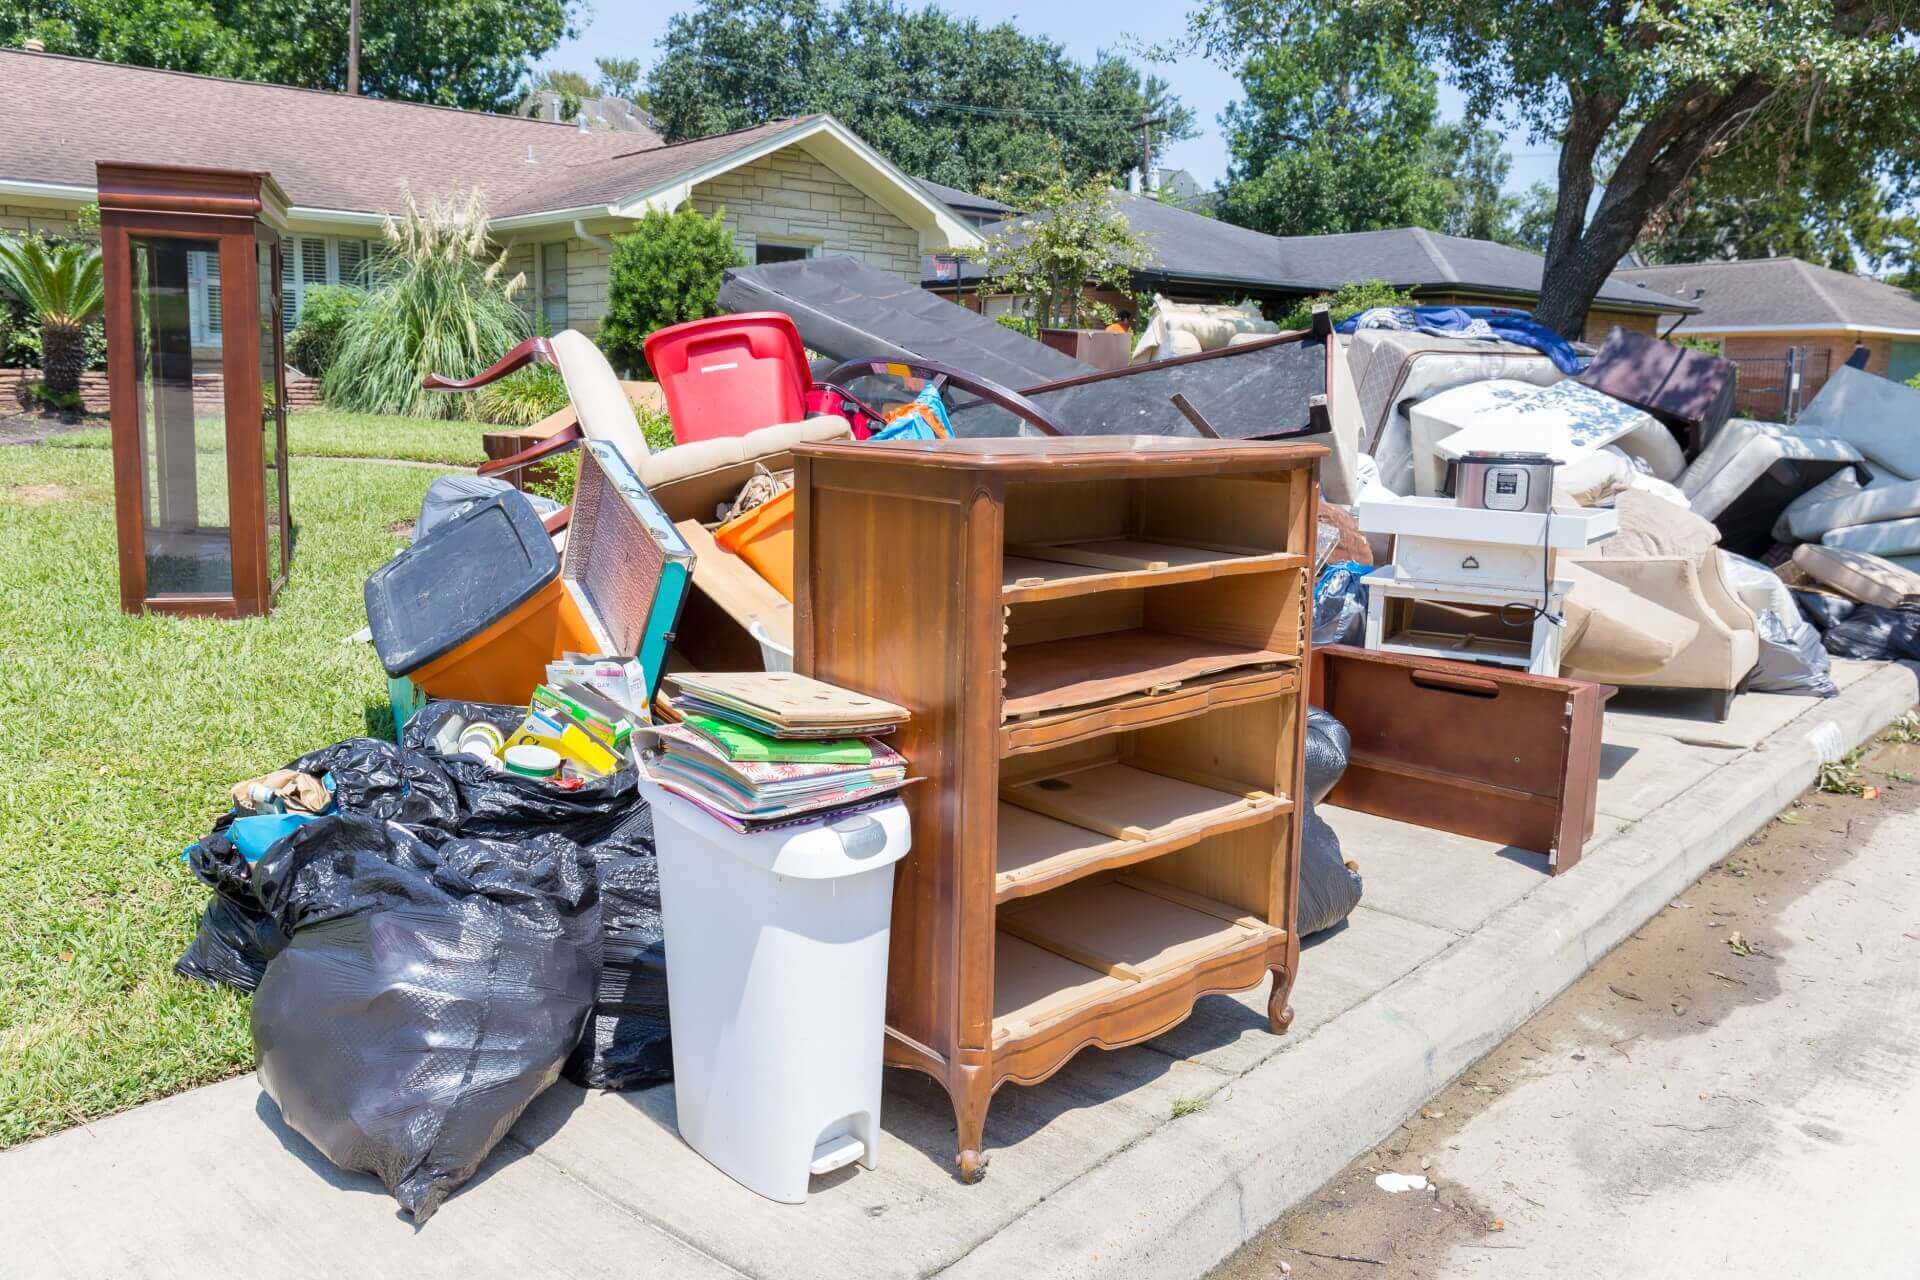 Dumpster Rentals Junk Removal Clean Out Services New Port Richey Holiday FL 0030